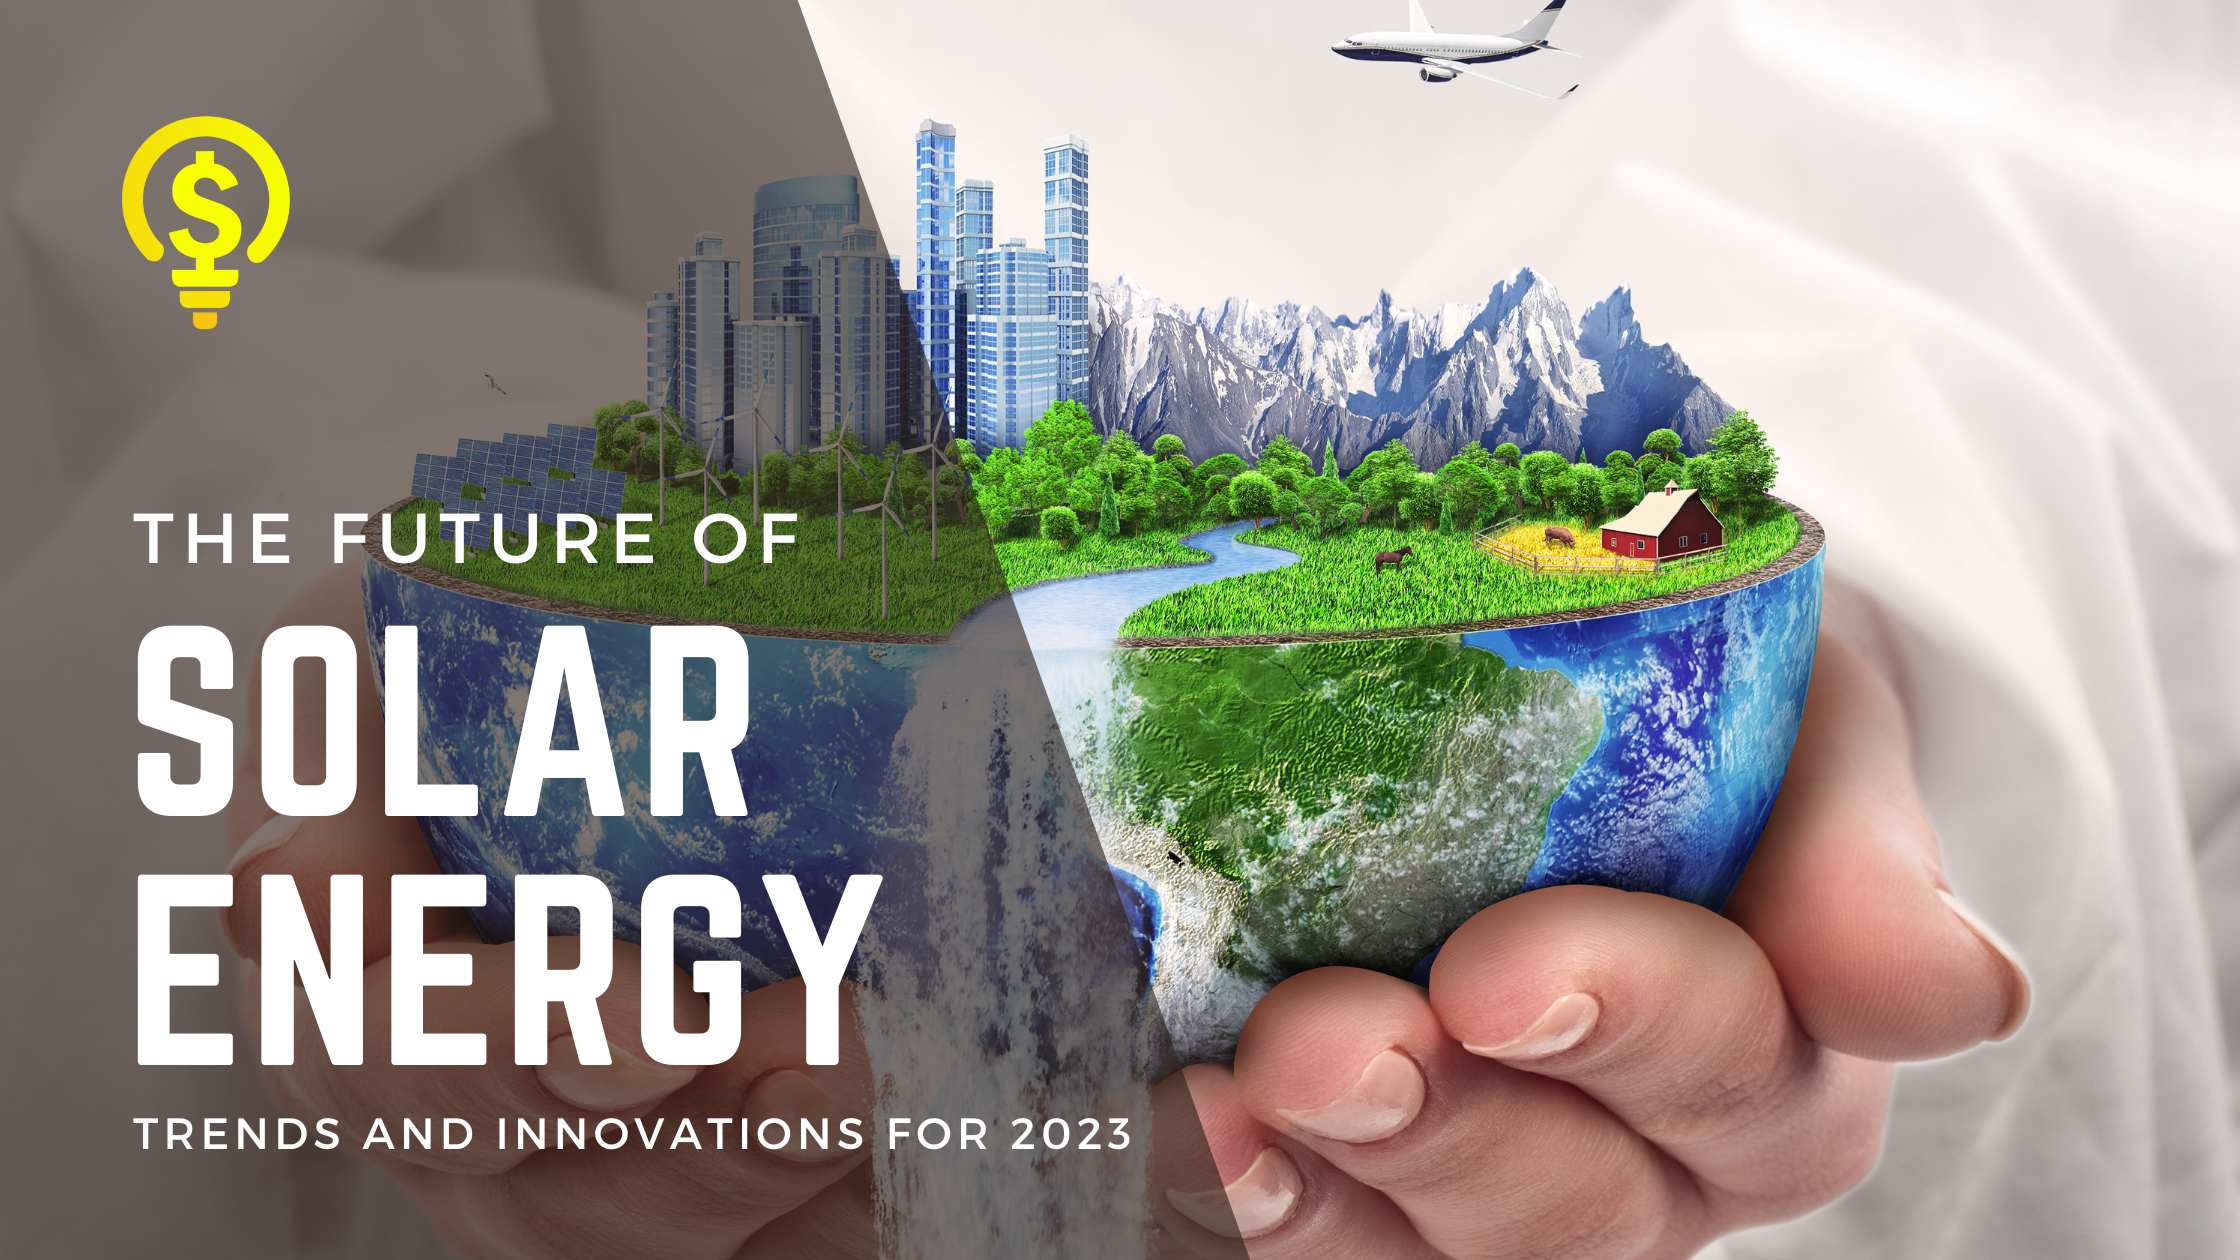 The future of solar energy is evolving, and Power to Light is your trusted partner in navigating these exciting changes. Stay tuned with us to harness the full potential of solar energy in 2023 and beyond.